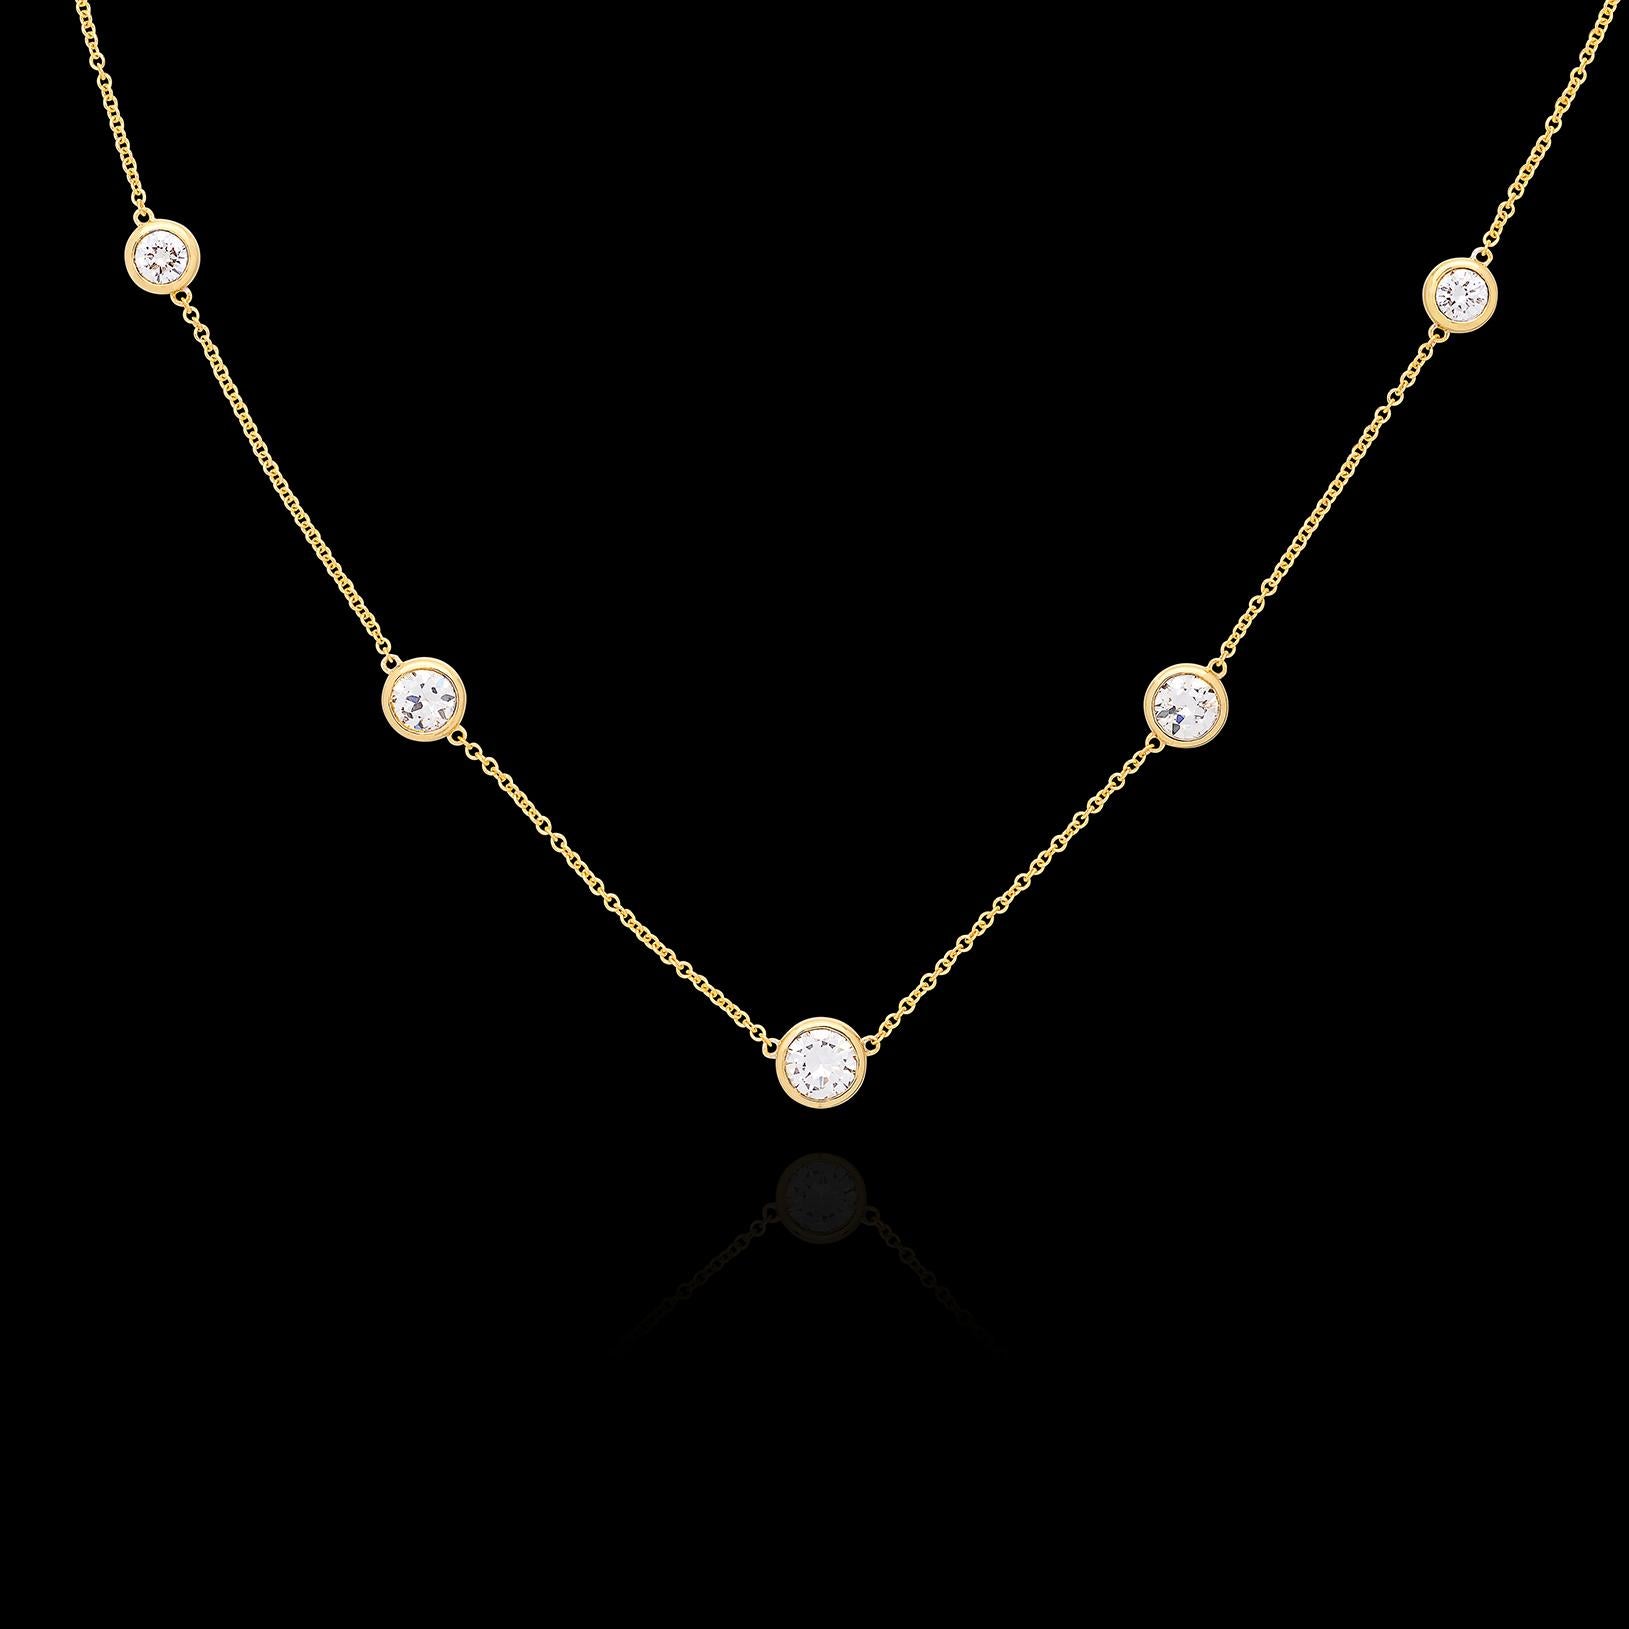 Classic beauty is always in style. This 18 karat yellow gold diamonds-by-the-yard necklace showcases 5 round brilliant-cut diamonds weighing in total 2.04 carats with the center diamond weighing approximately .70 carats on its own. The stones are